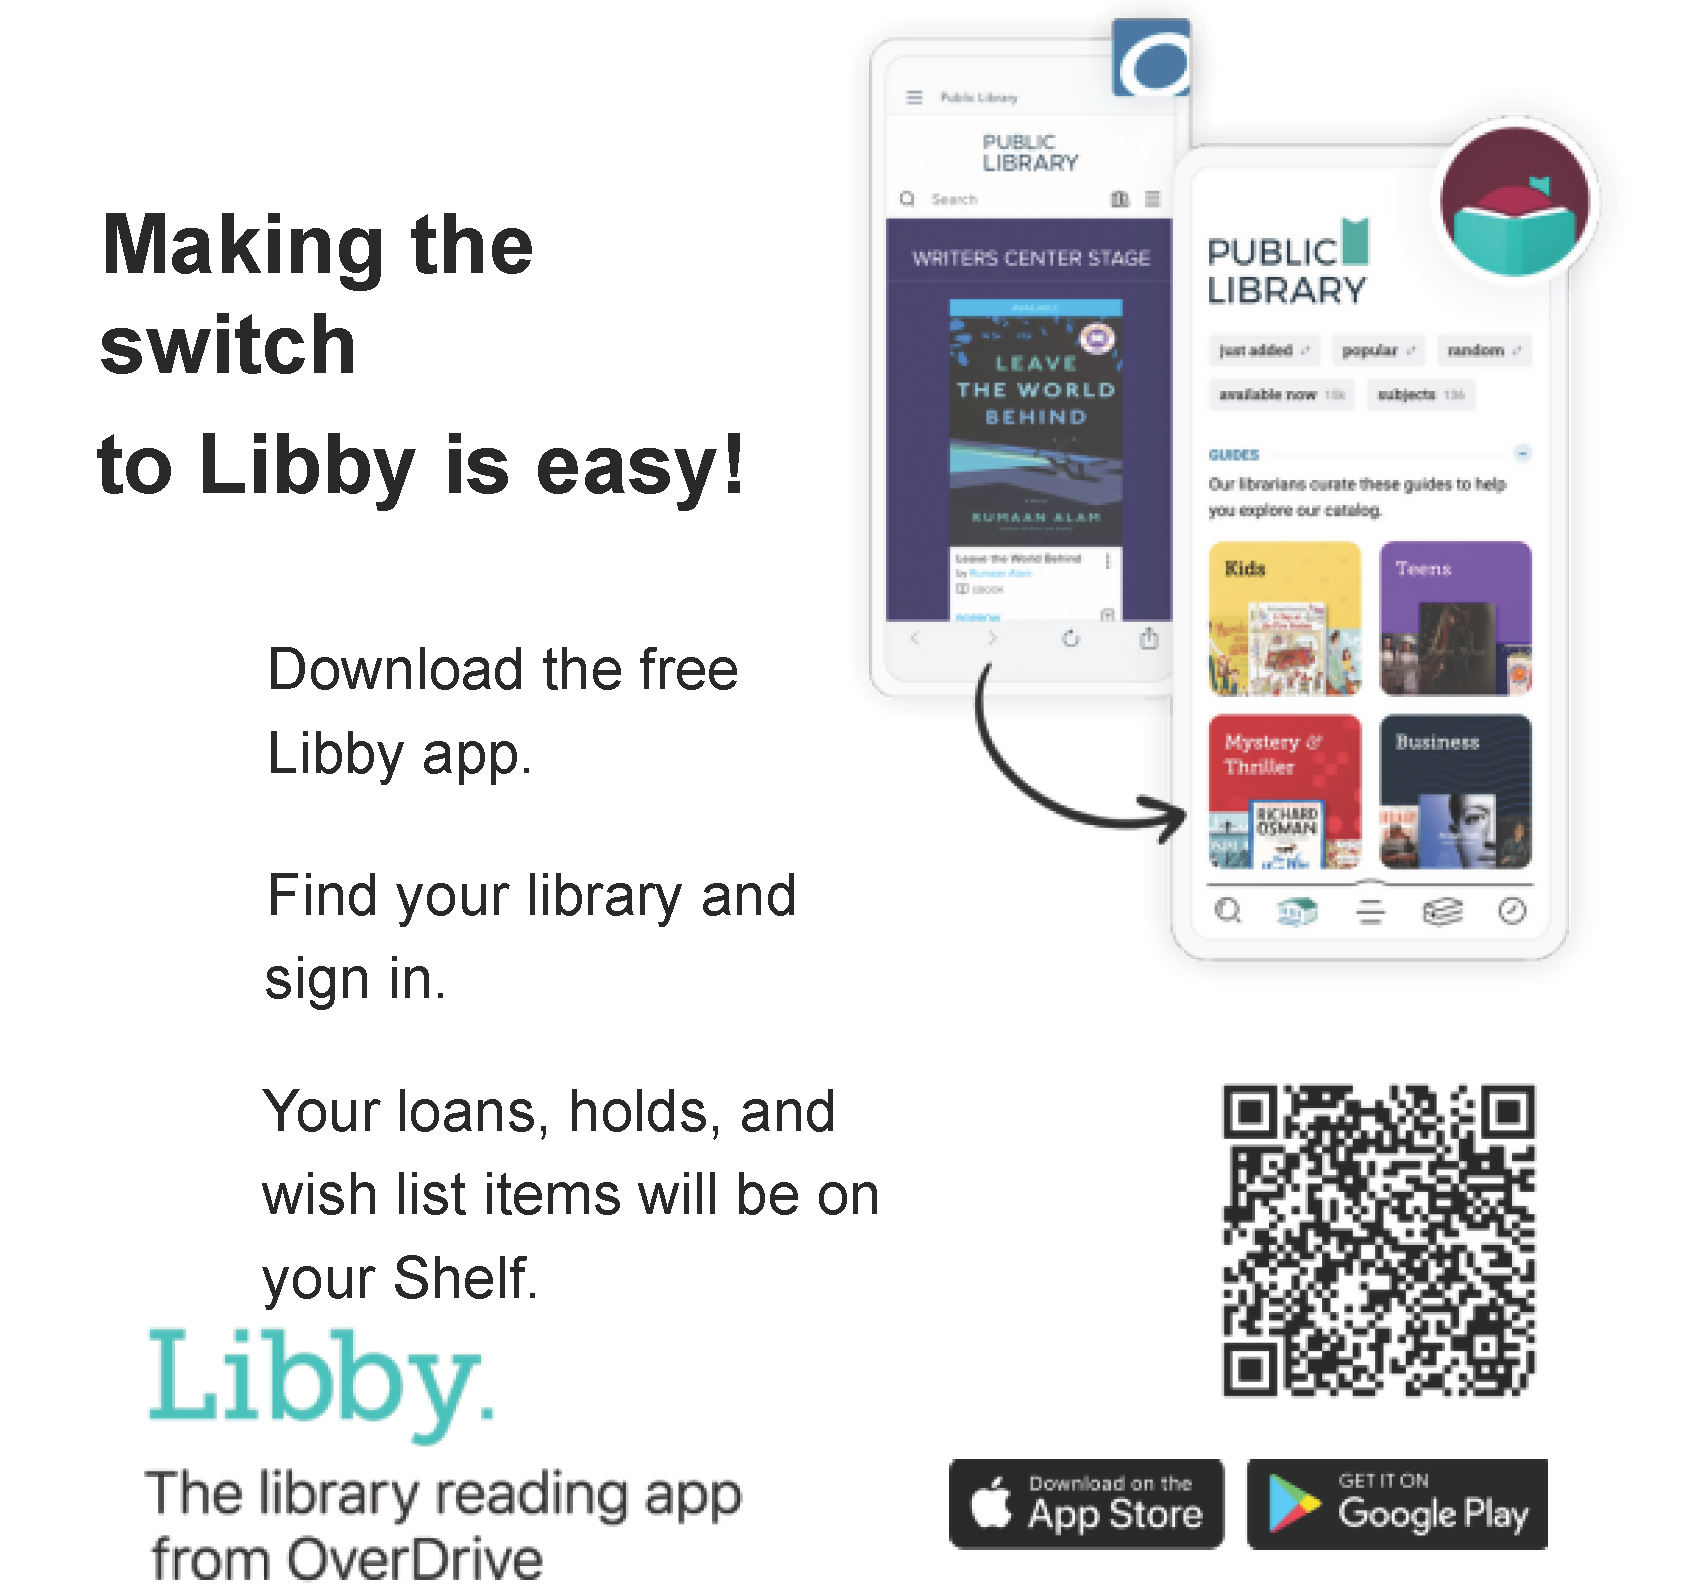 Making the switch to Libby is easy! Download the free Libby app. Find your library and sign in. Your loans, holds, and wish list items will be on your Shelf. Scan this QR code to learn how to install Libby on your device (including Kindle Fire tablets), review FAQs, register for free training, & more!